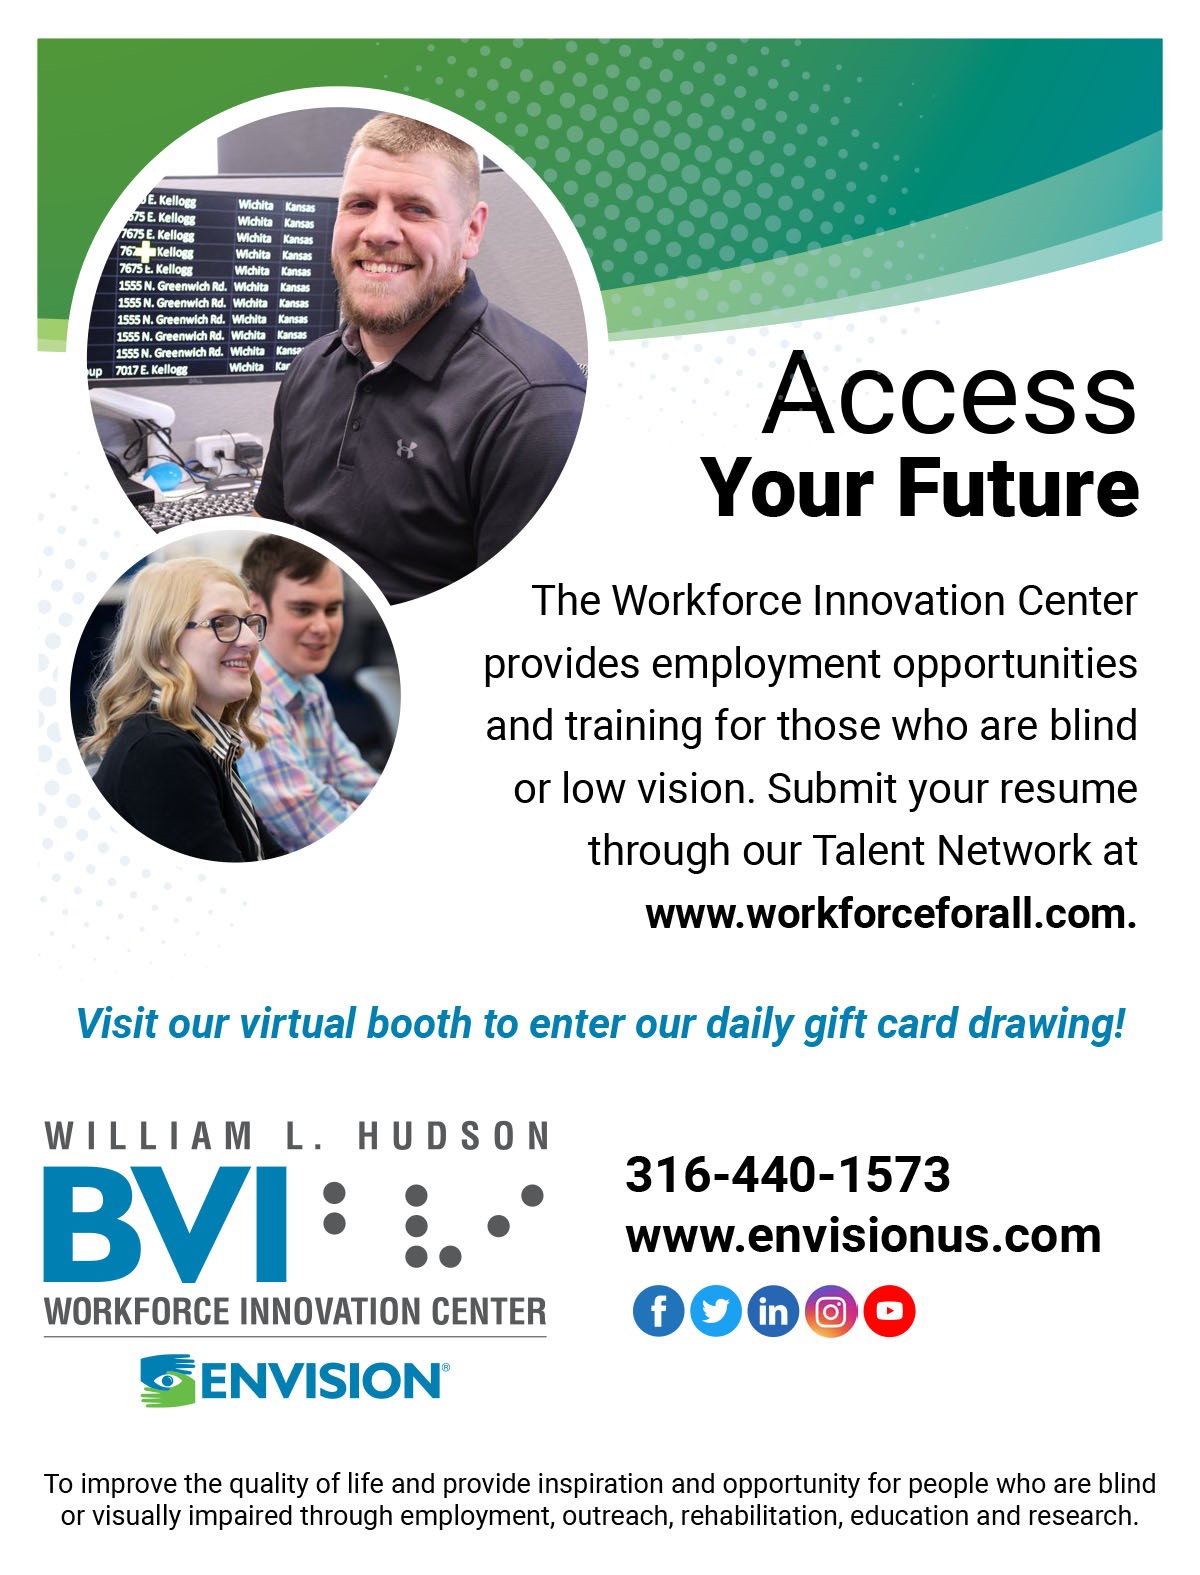 Access your future. The Workforce Innovation Center provides employment opportunities and training for those who are blind or low vision. Submit your resume through our talent network at www.workforcforall.com. Visit our virtual booth to enter our daily gift card drawing! 316-440-1573 | www.envision.com.  William L. Hudson BVI Workforce Innovation Center. To improve the quality of life and provide inspiration and opportunity for people who are blind or visually impaired through employment, outreach, rehabilitation, education and research.